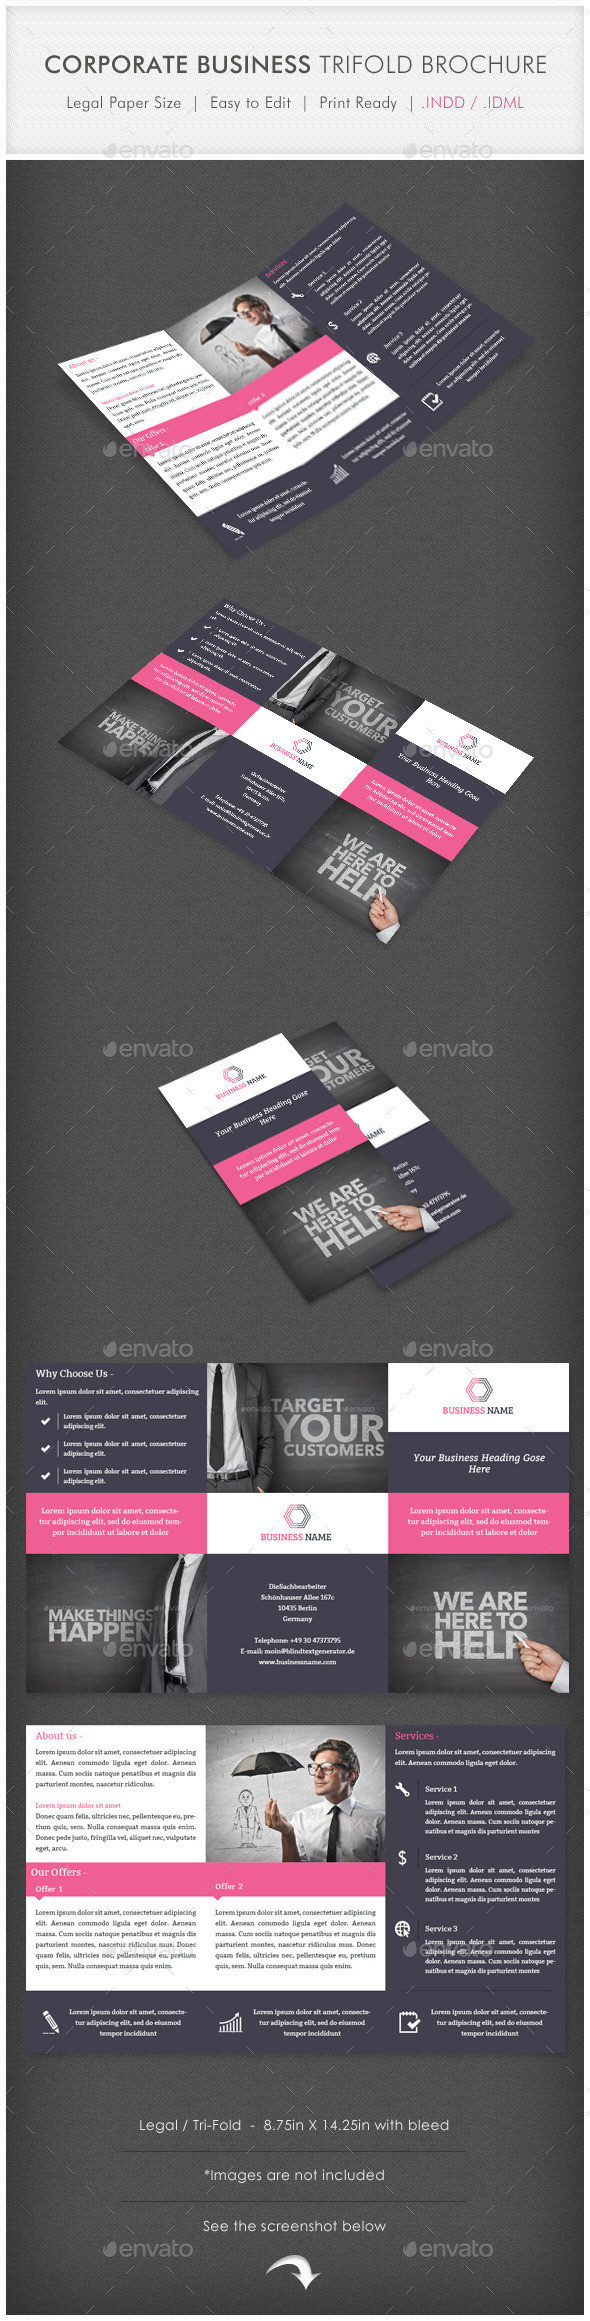 Corporate 20business 20trifold 20brochure